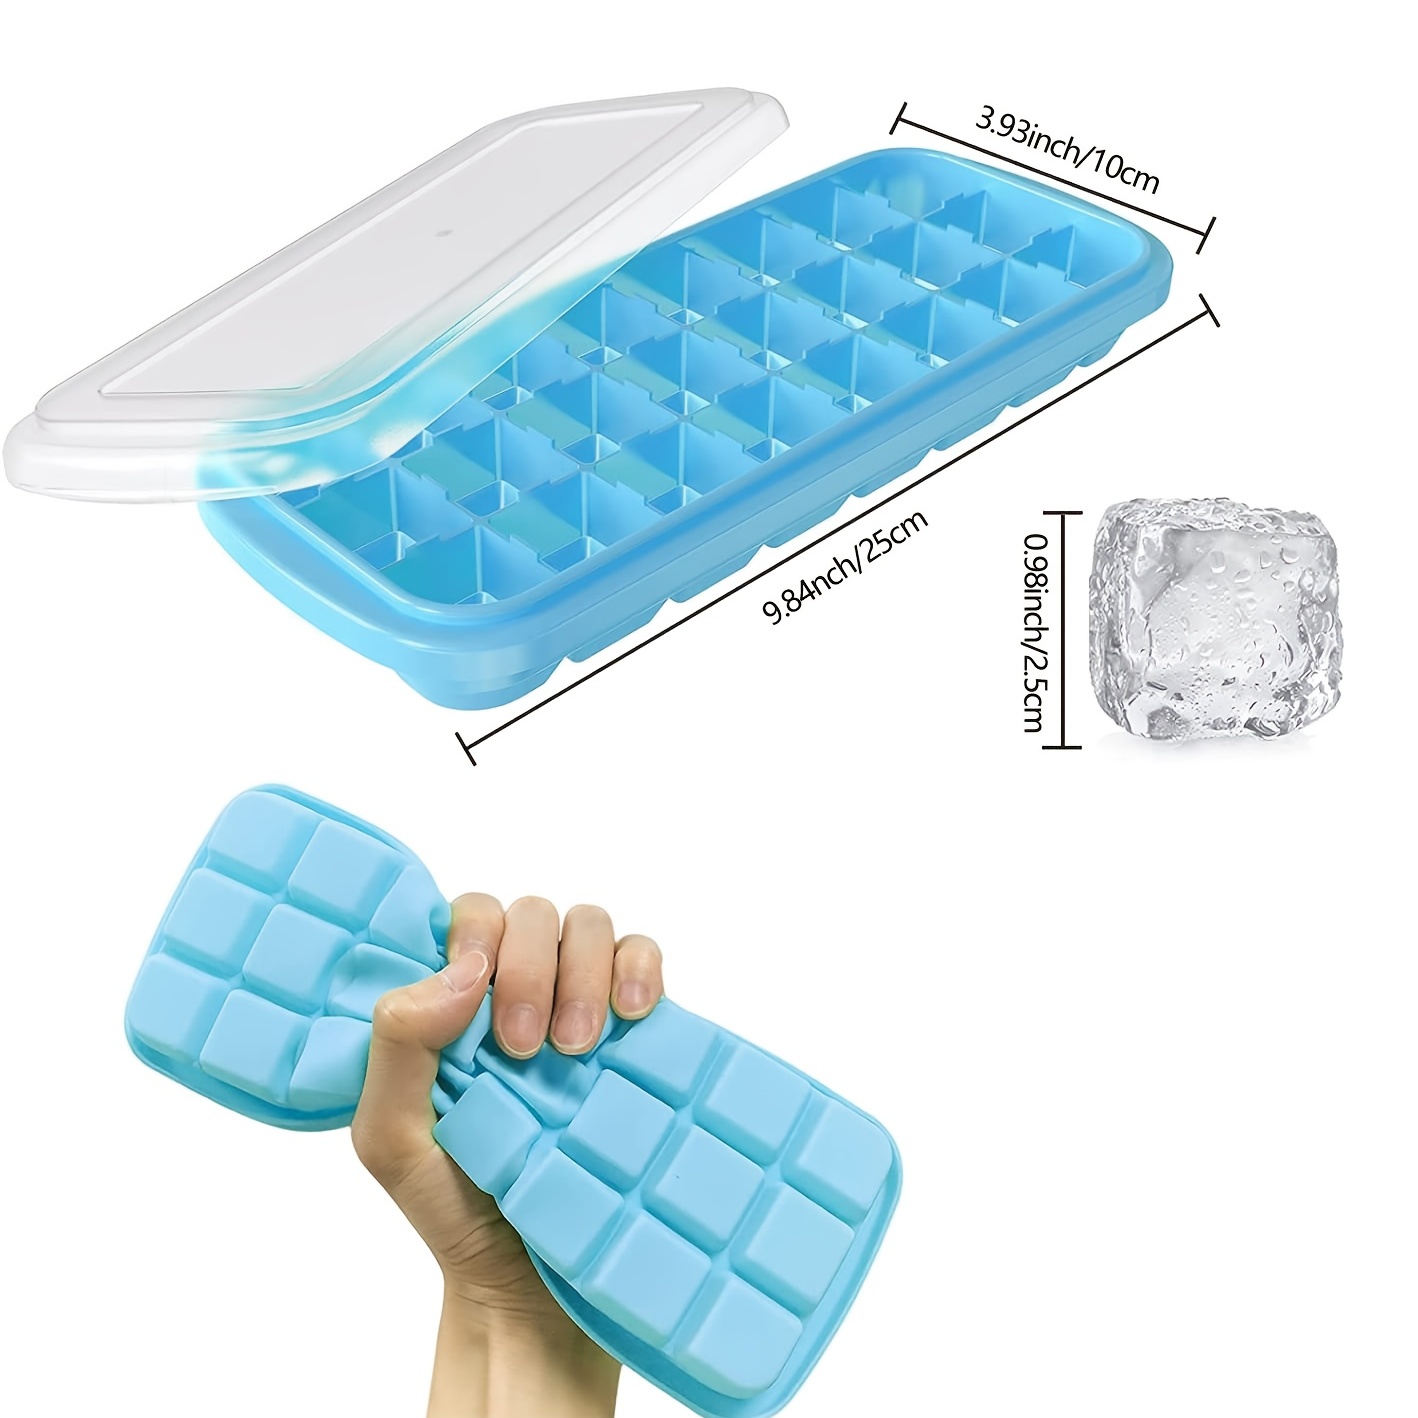 Ice Cube Trays 4 Pack, Stackable Easy Release Silicone Ice Trays,with 4  Removable Lids, Blue+Pink